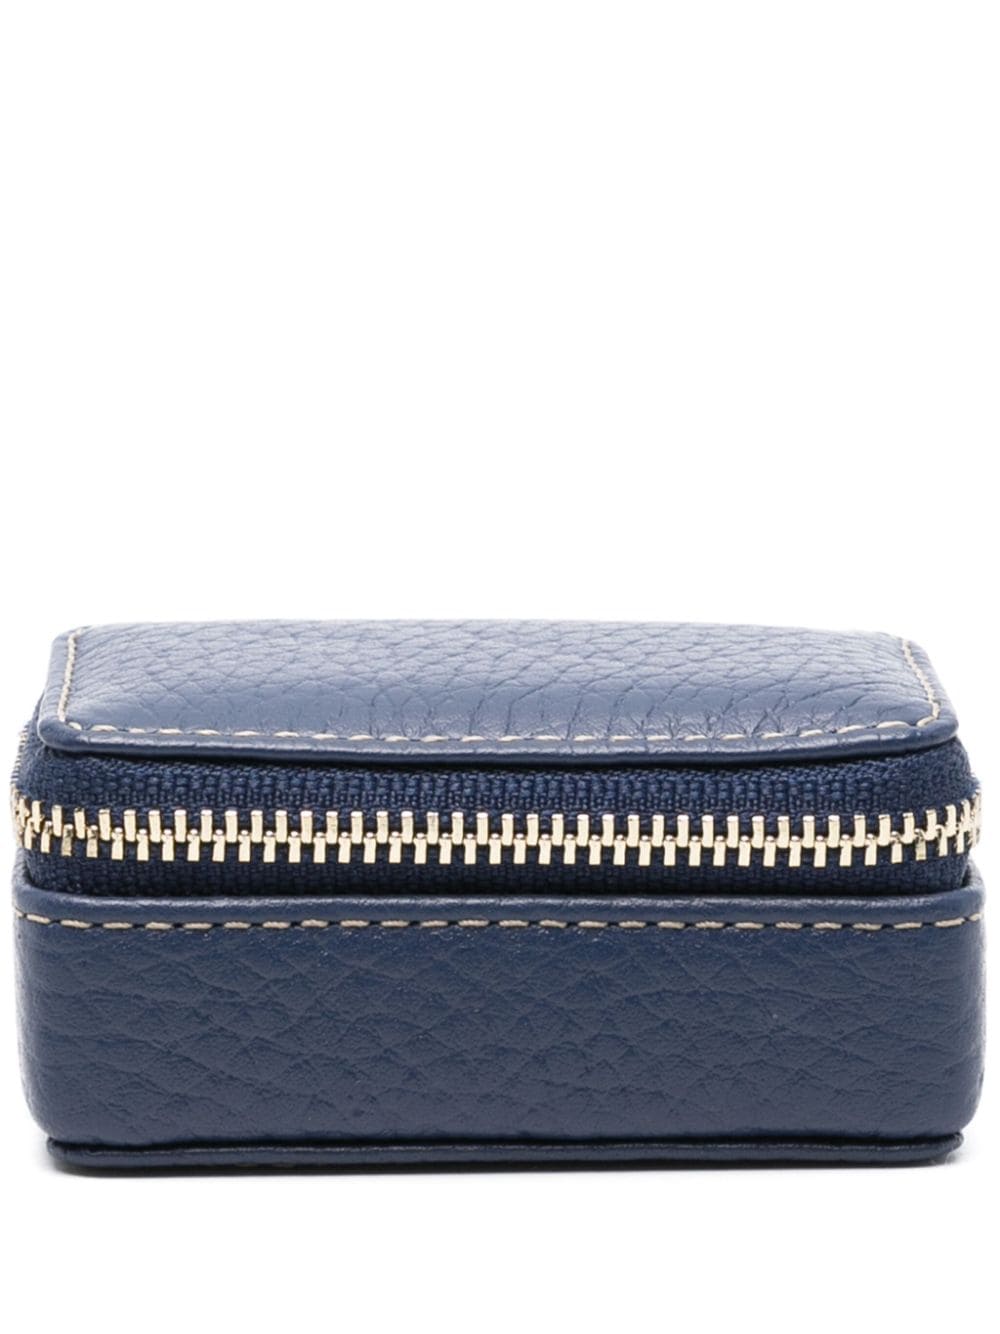 Aspinal Of London small Travel jewellery box 8cm x 4cm - Blue von Aspinal Of London